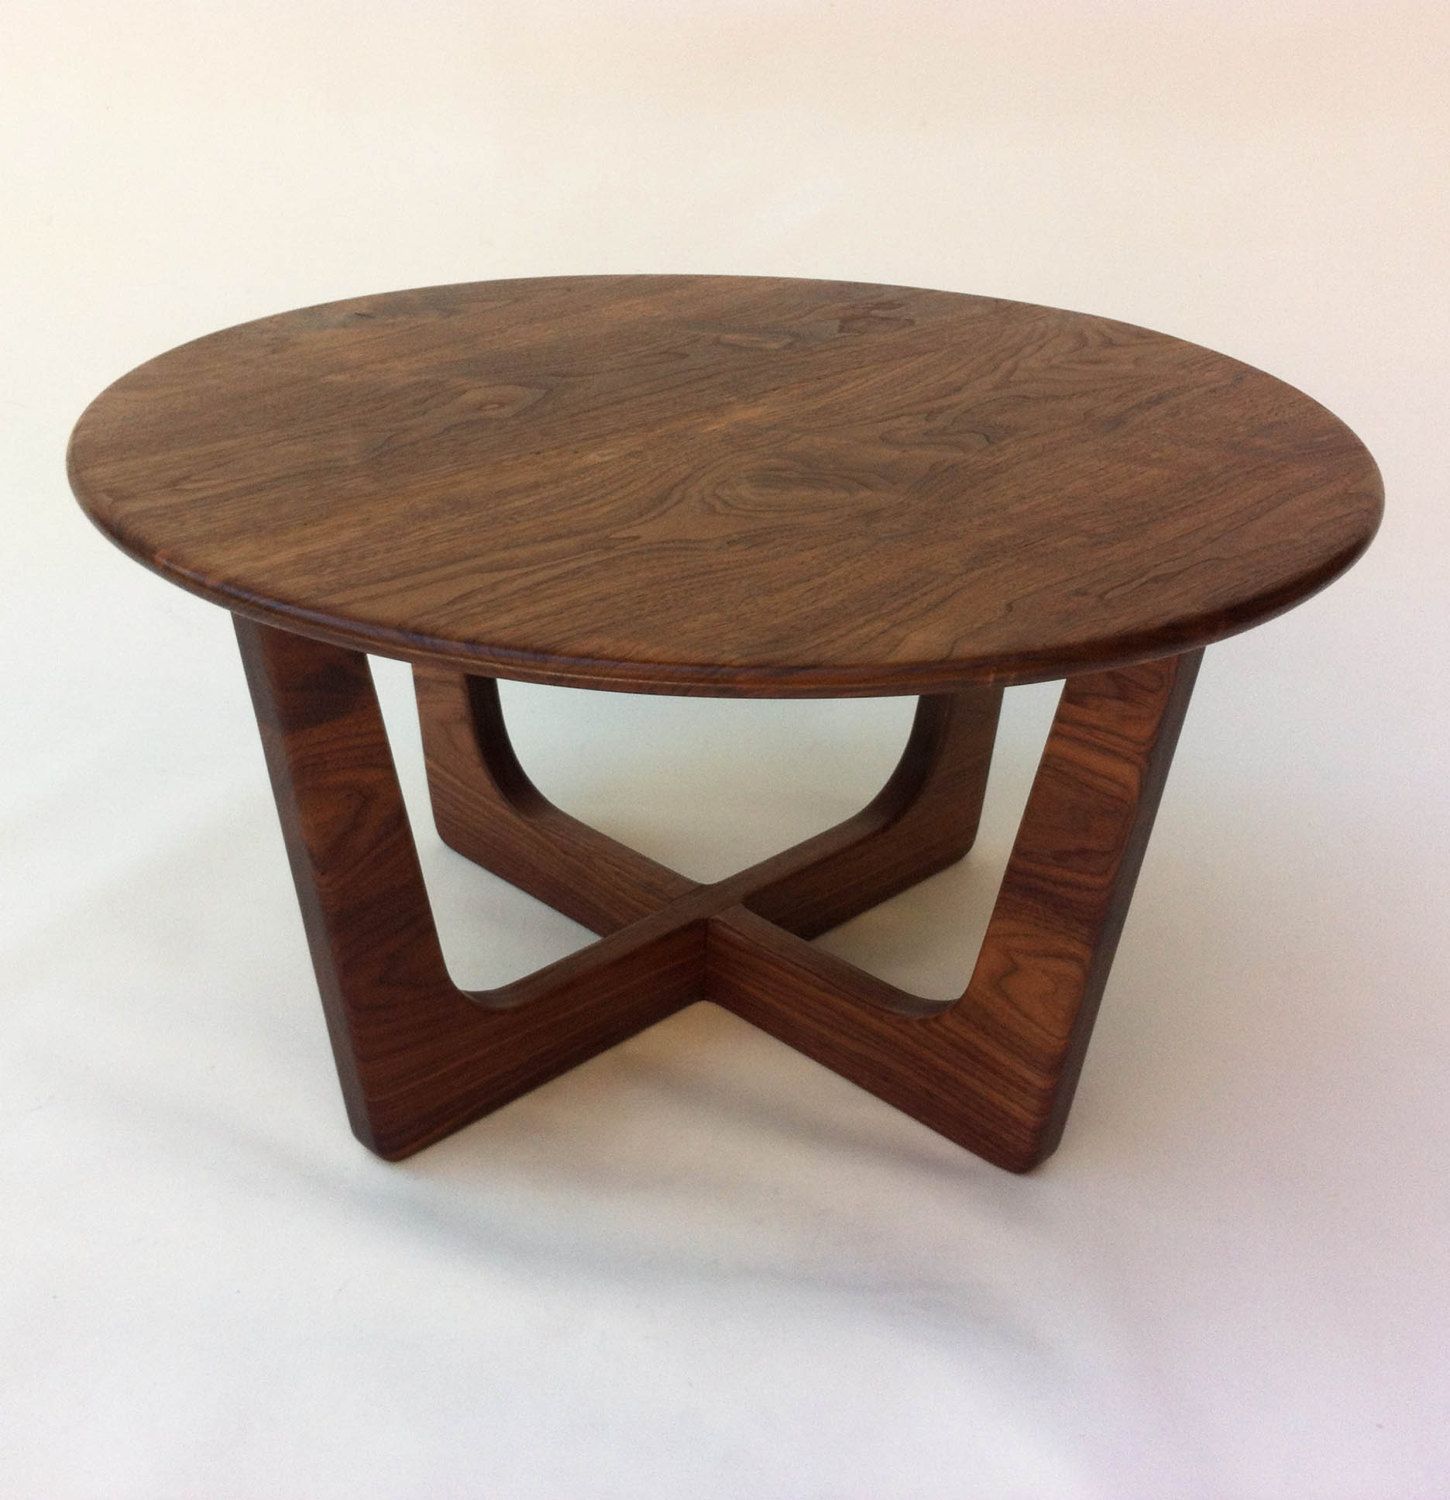 Solid Walnut Round Mid Century Modern Coffee Table In Coffee Tables With Solid Legs (View 7 of 20)